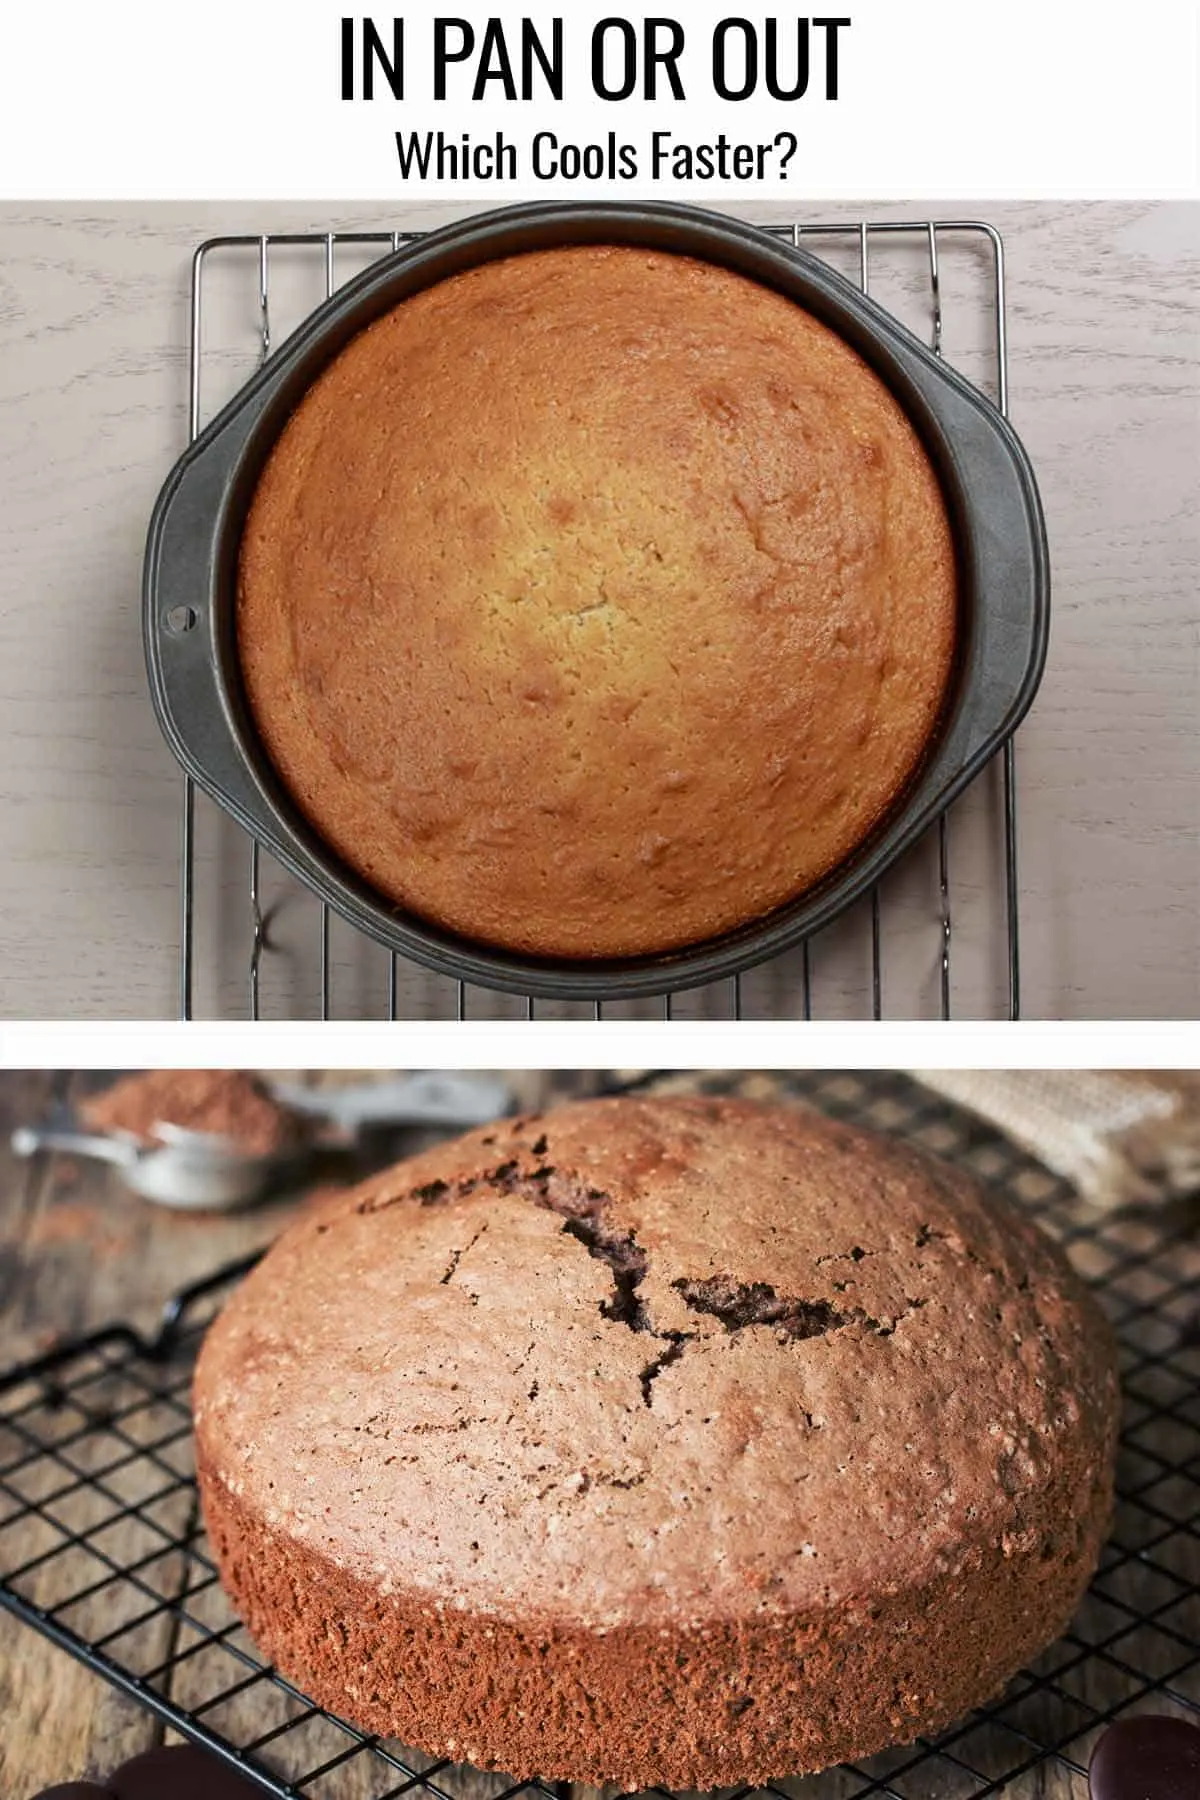 Cake in pan cooling and cake out of pan cooling.